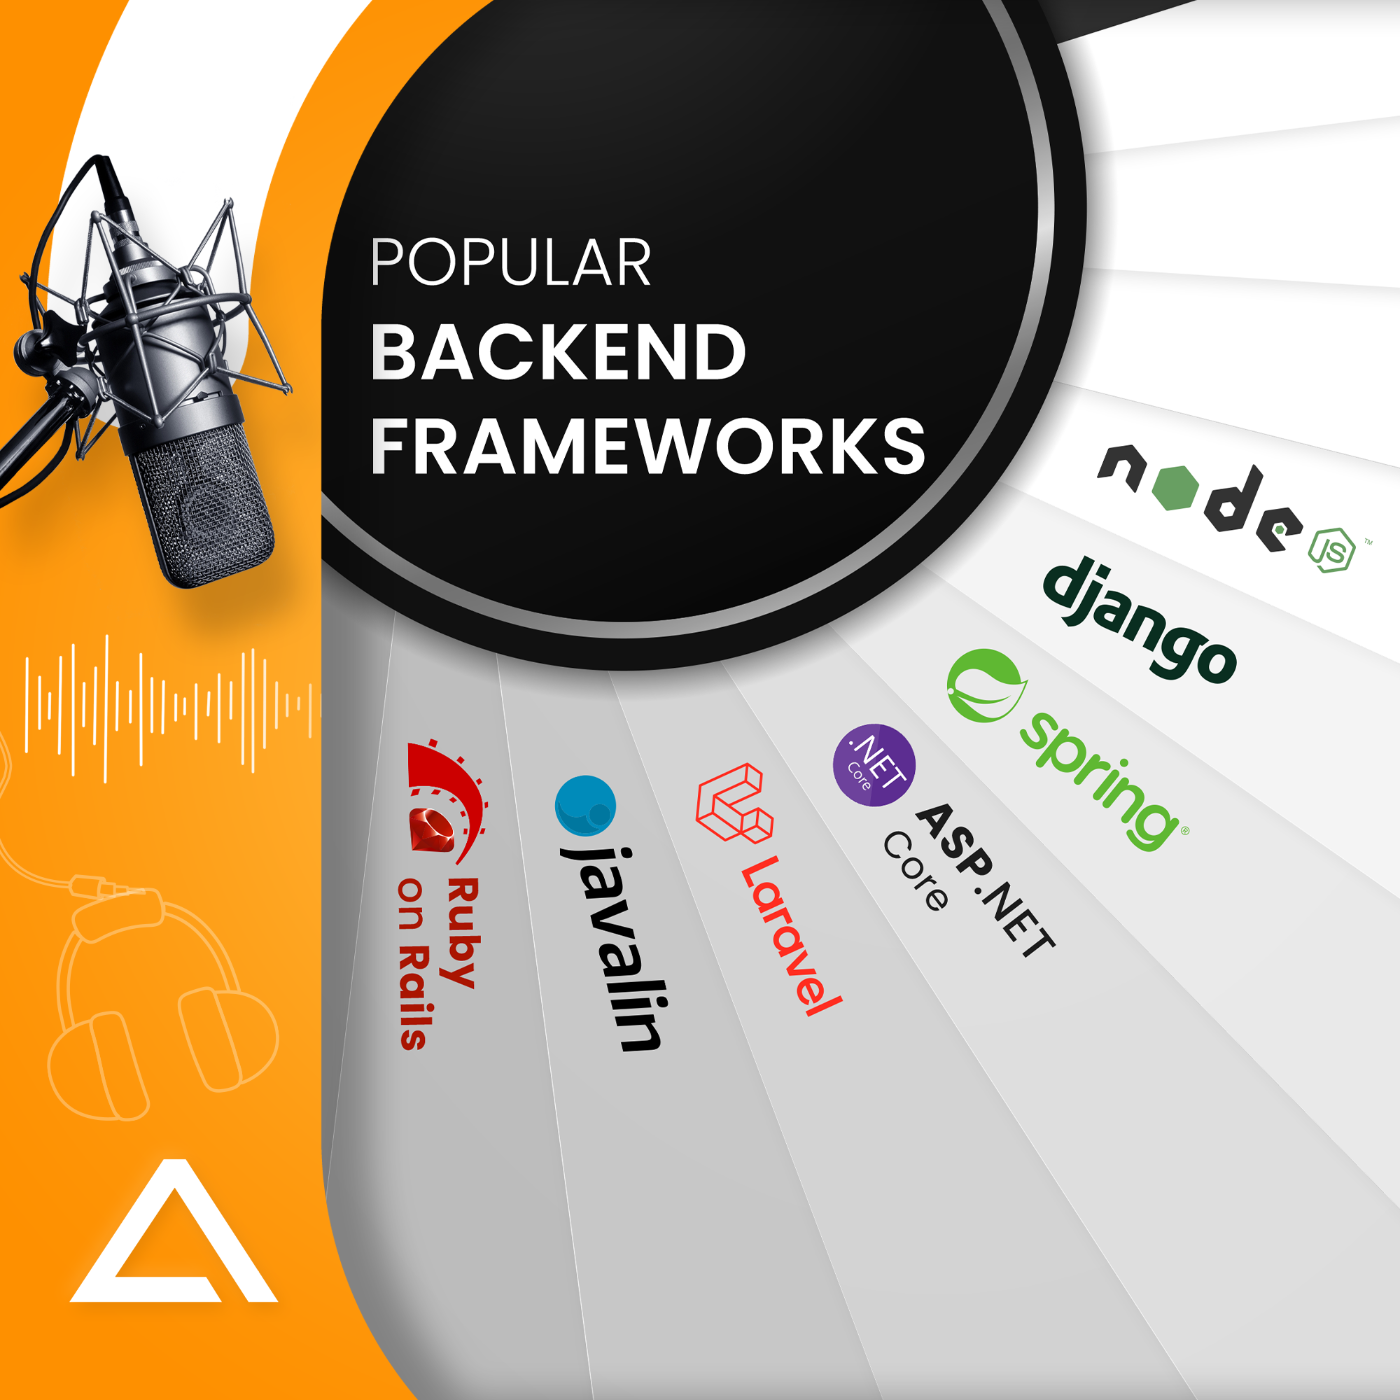 Most Popular Backend Frameworks To Look For in 2024